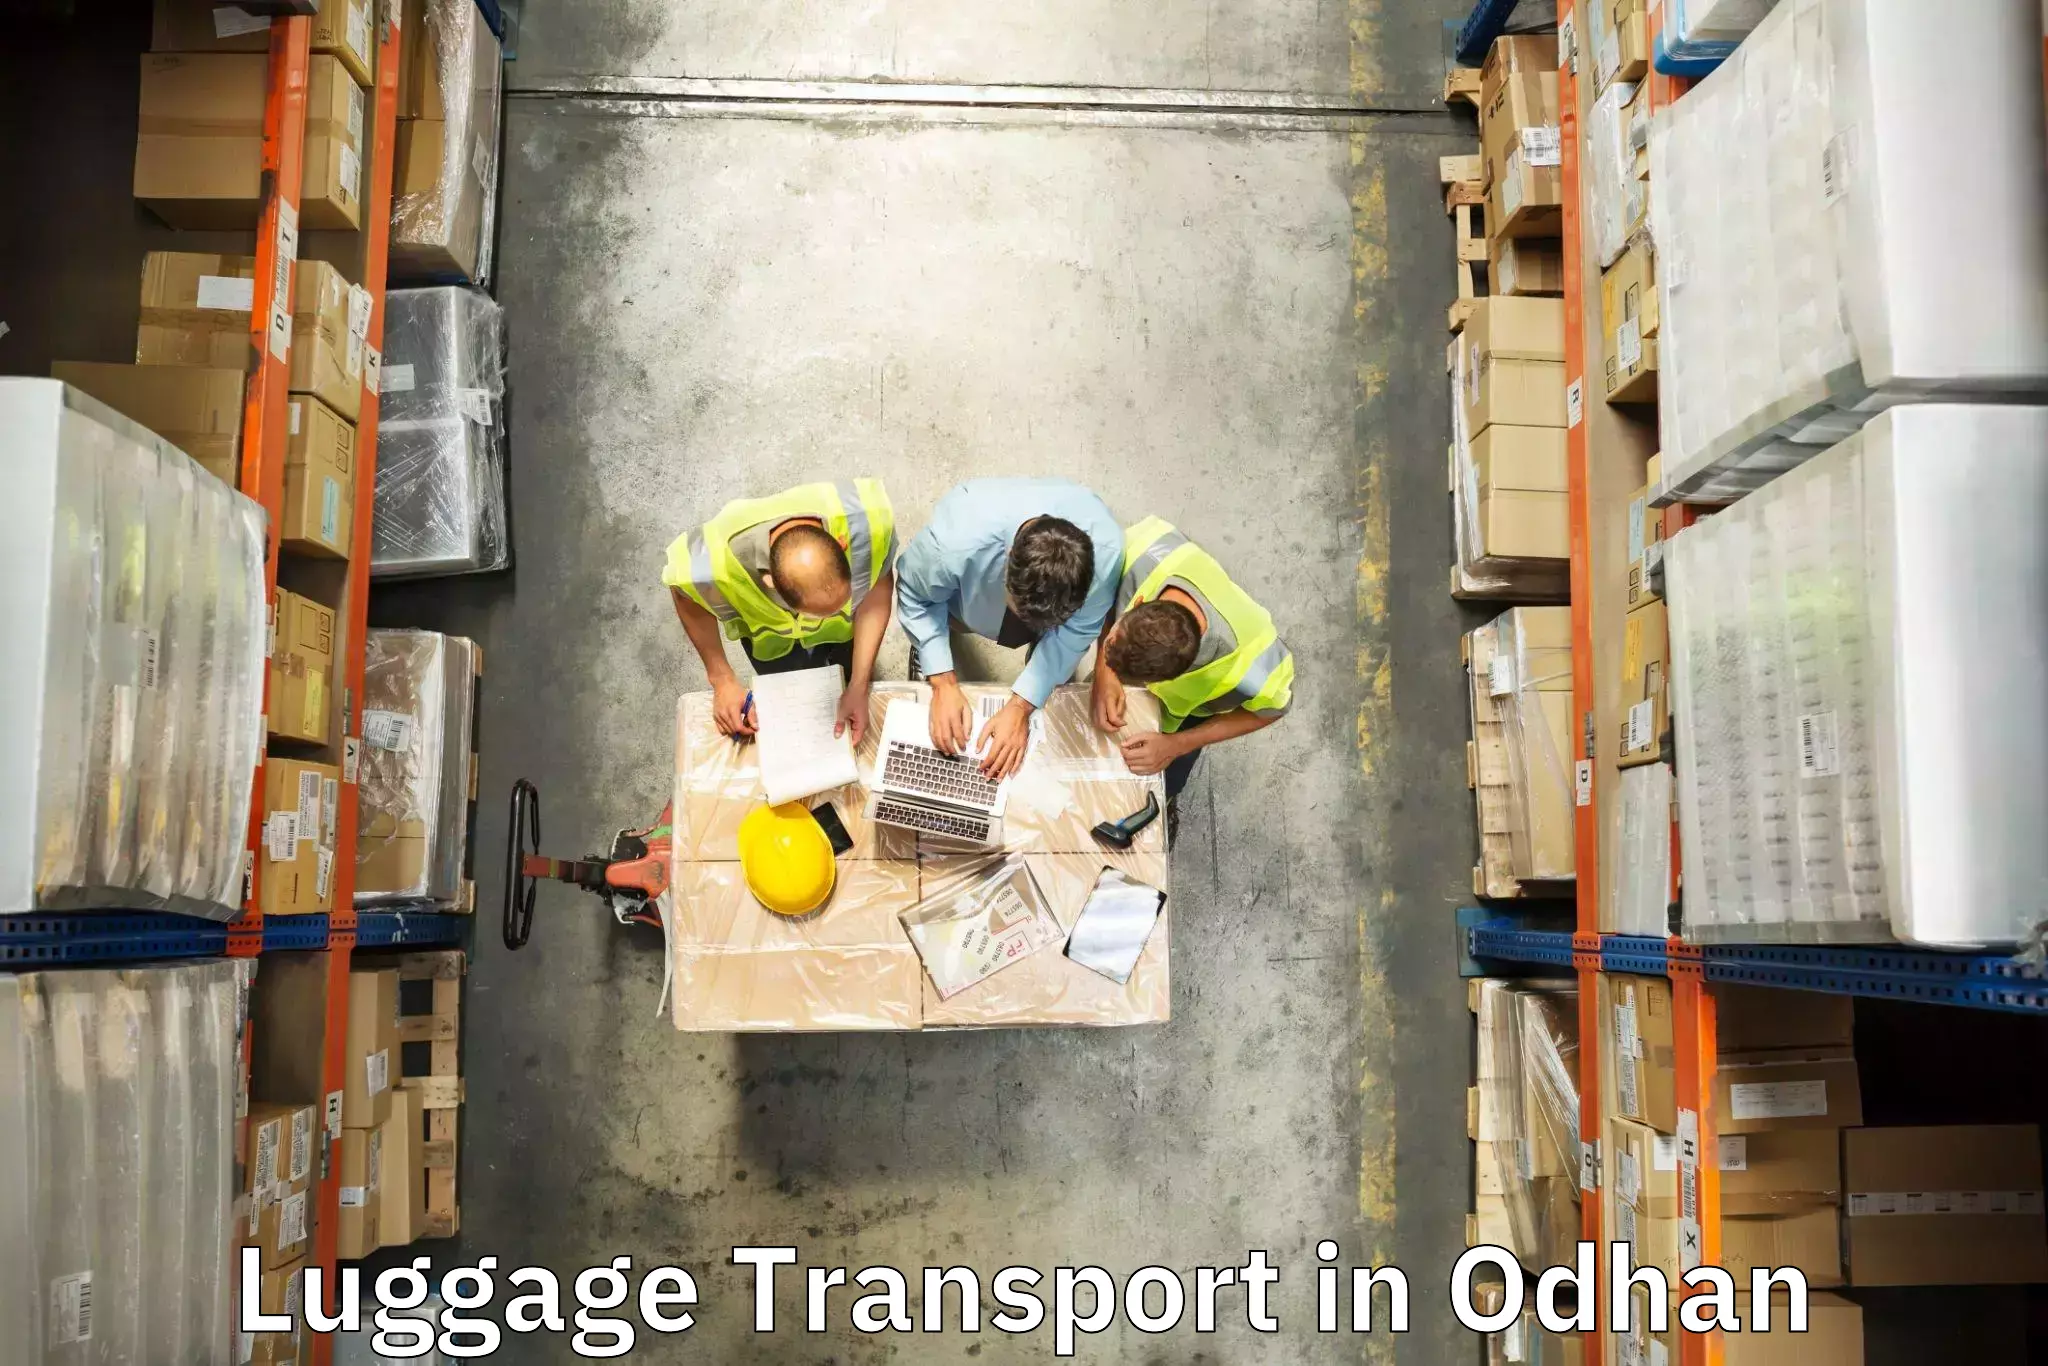 Luggage shipment processing in Odhan